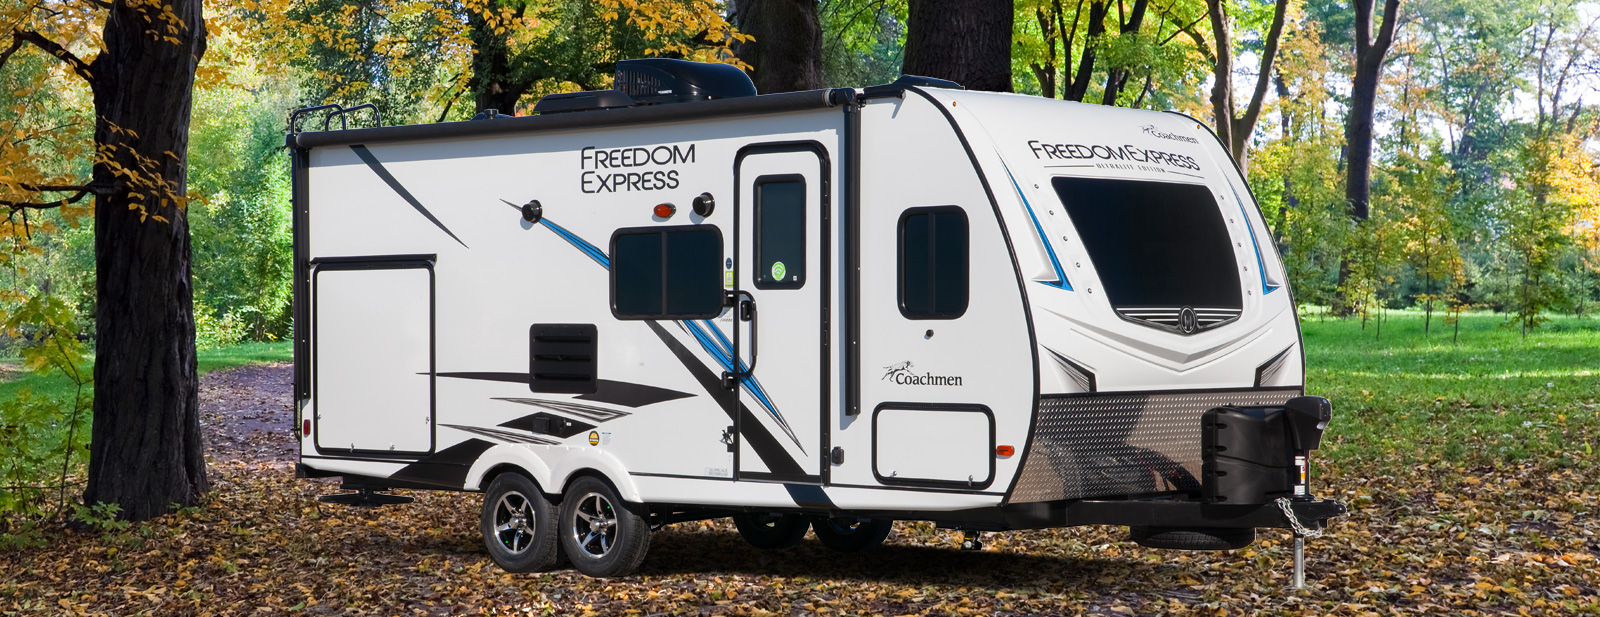 A double axle travel trailer sits in the leaves by a tree.